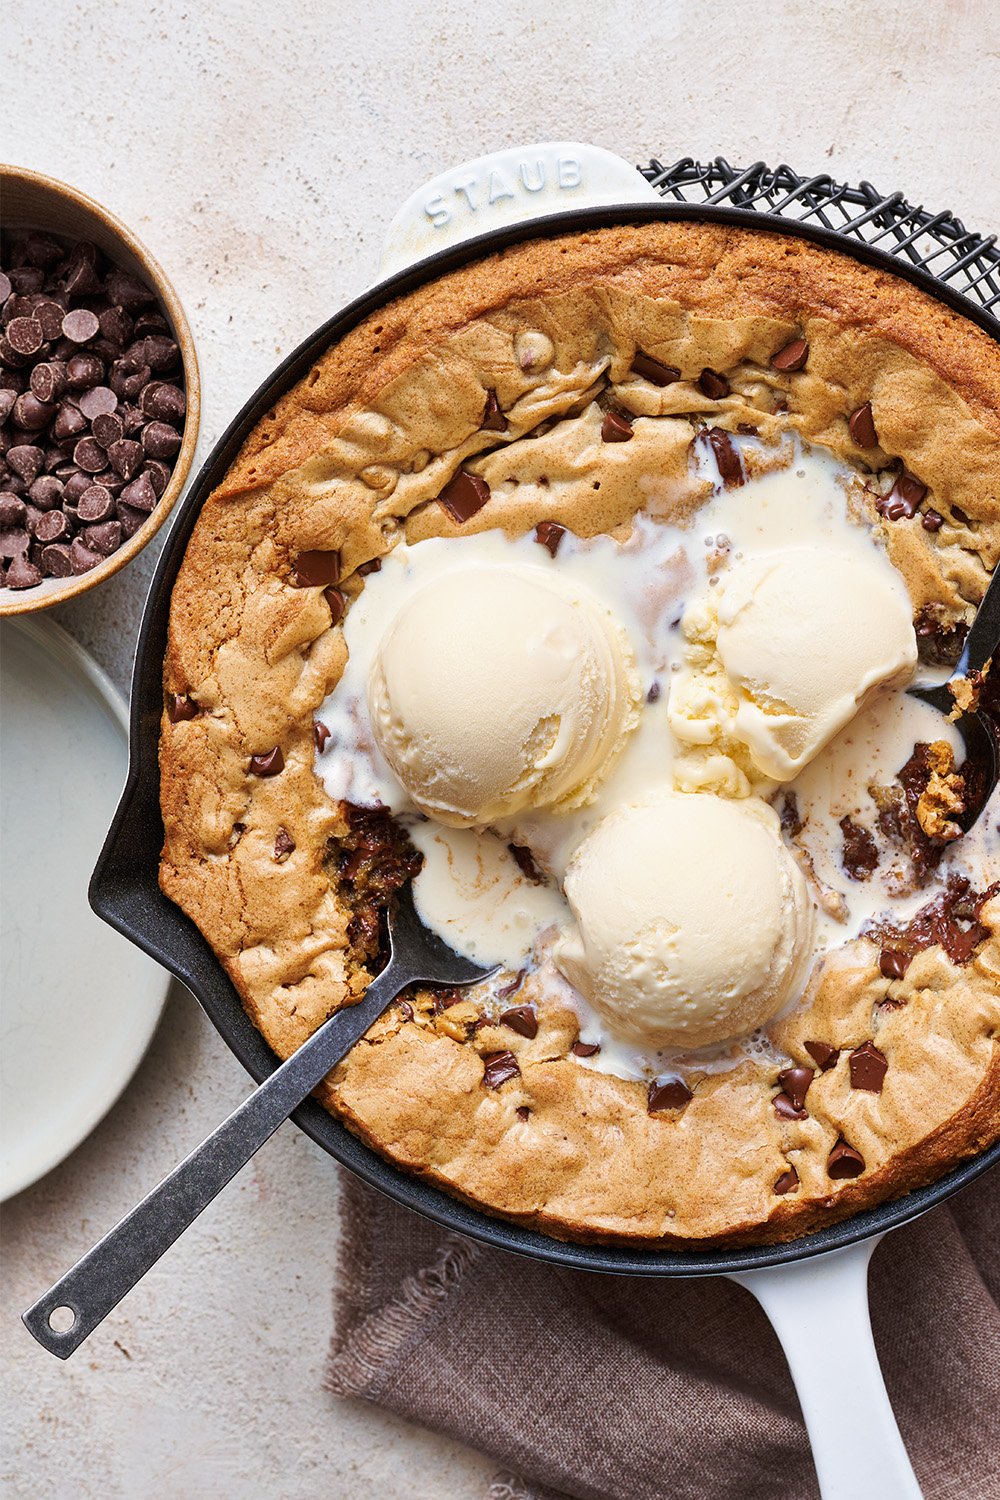 spoons taking bites out of chocolate chip pizookie recipe